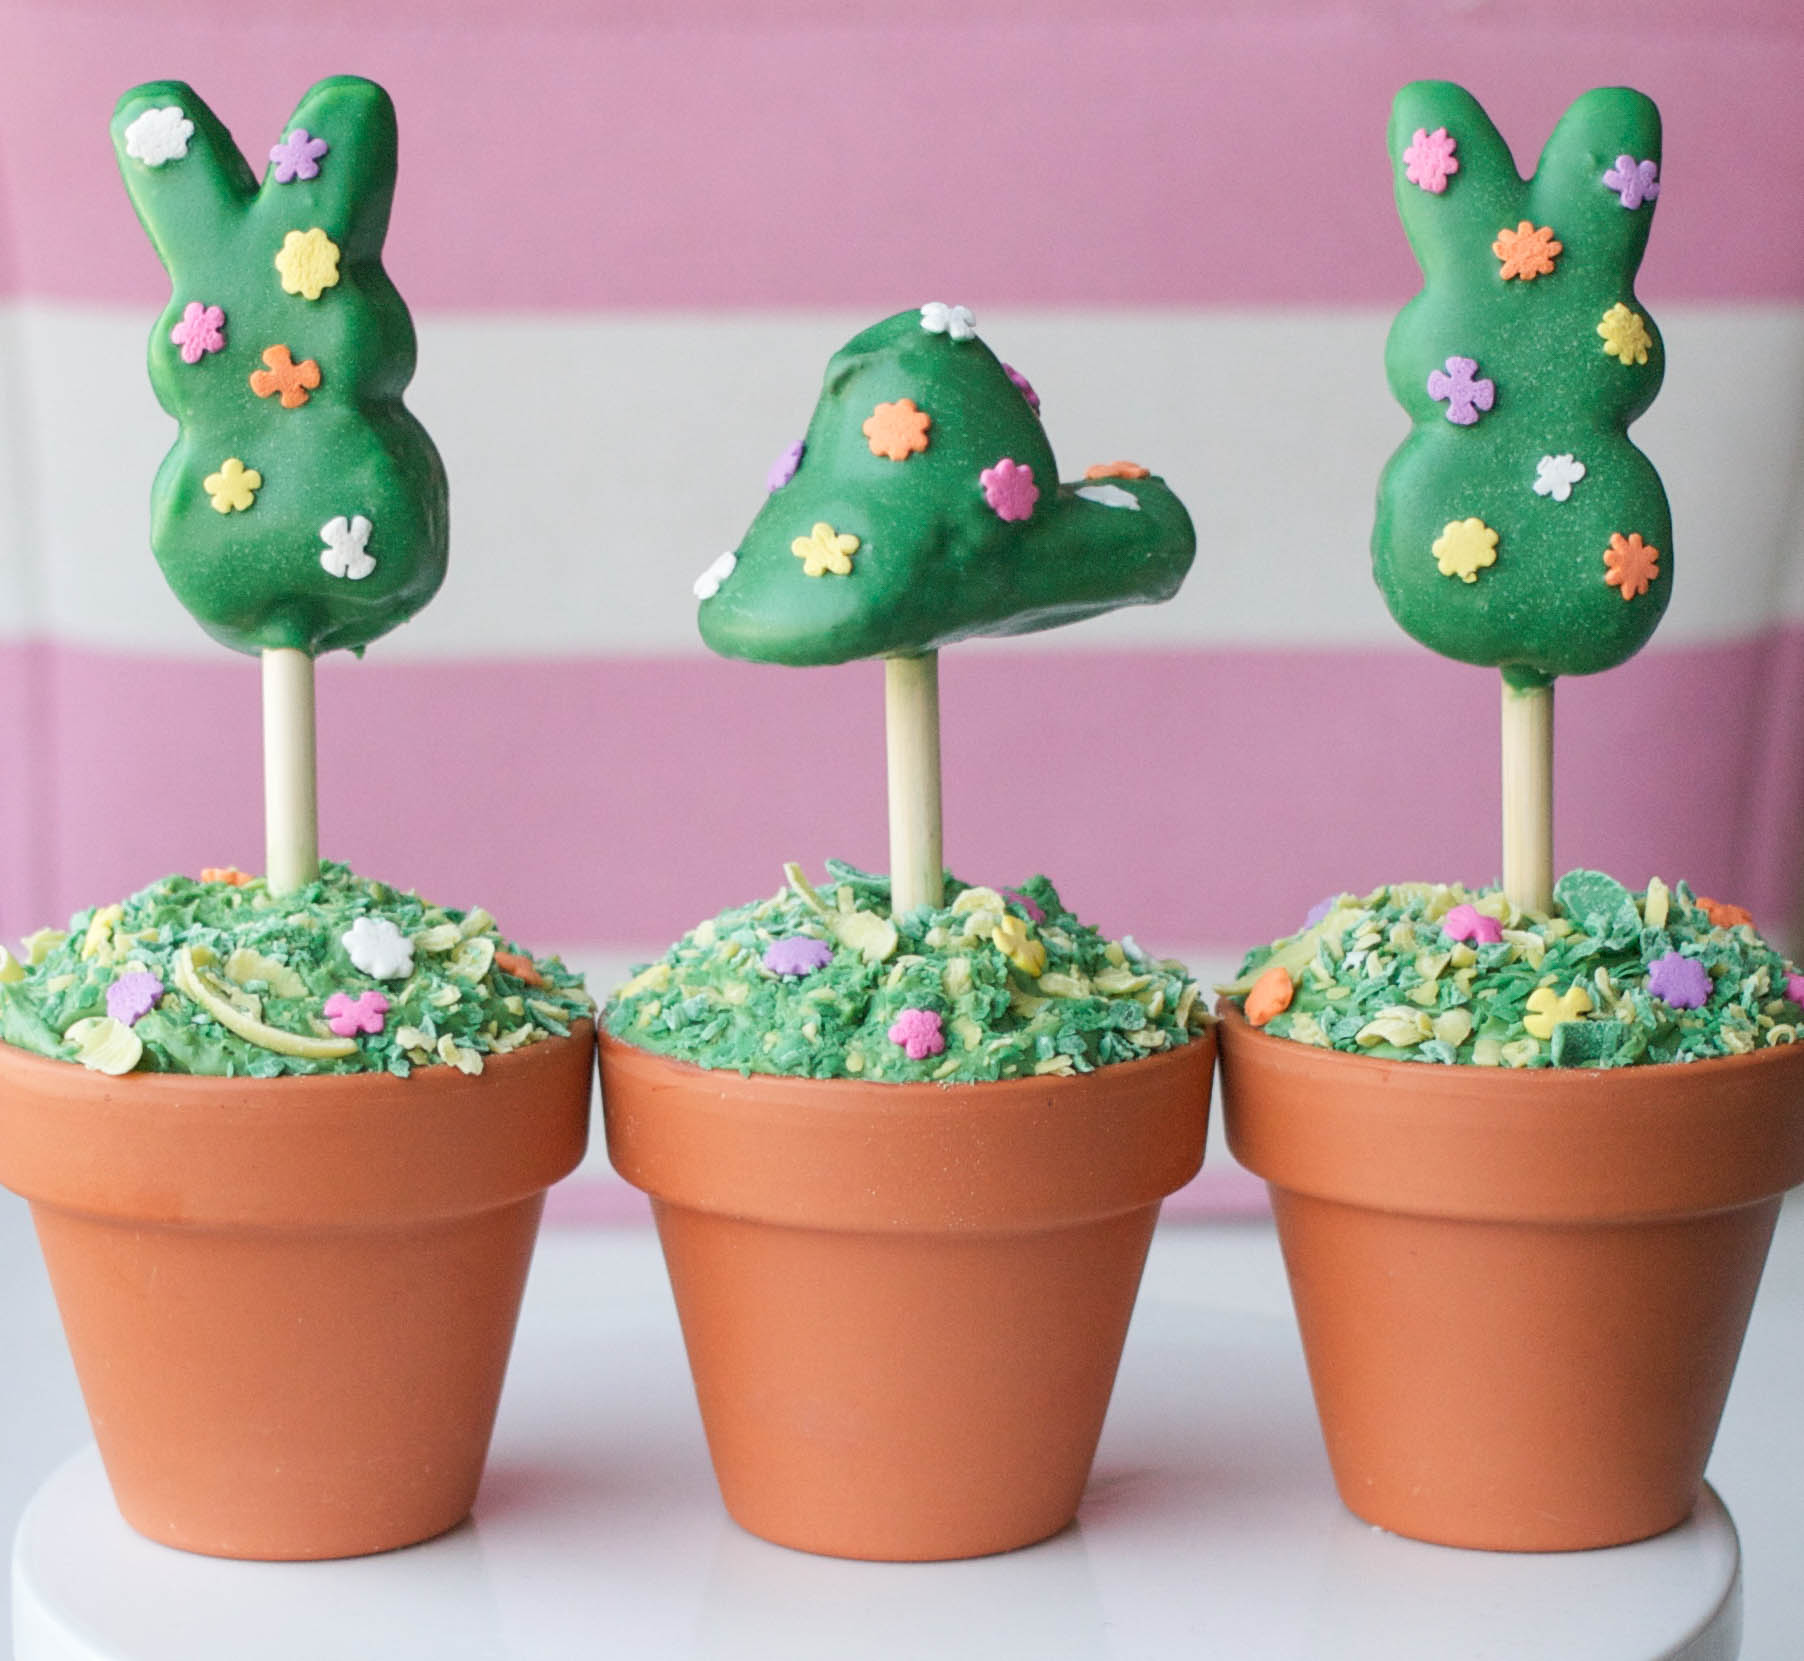 How to Build Festive Marshmallow Topiary Tree in a Few Easy Steps